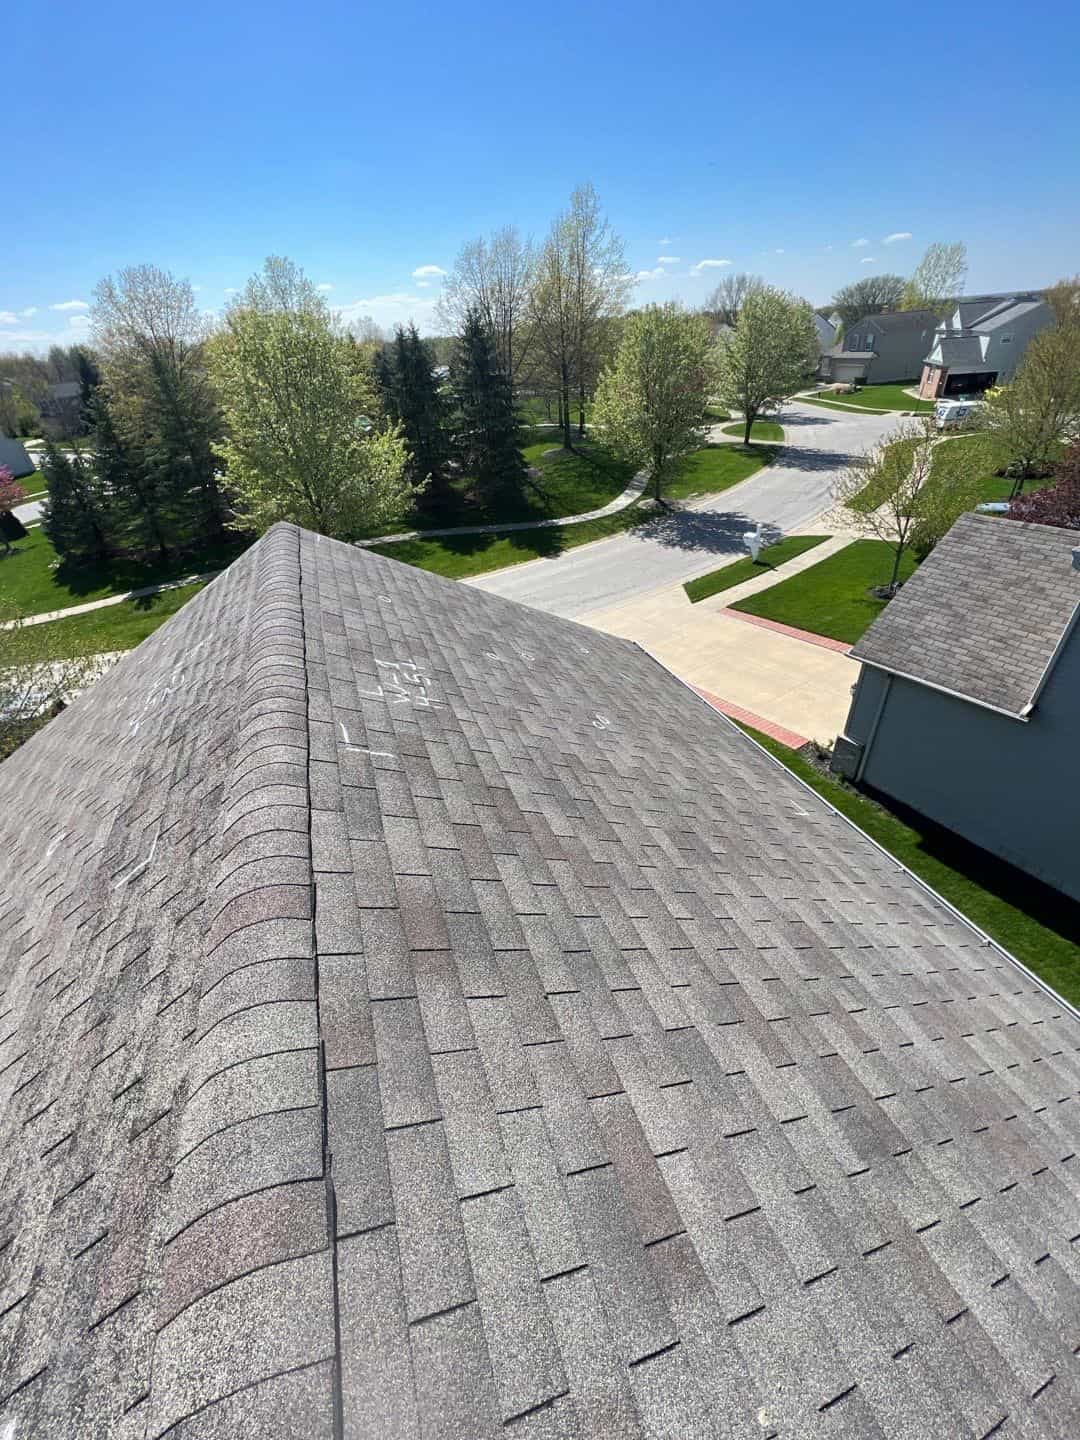 An important aerial view of a shingled roof in a residential neighborhood.